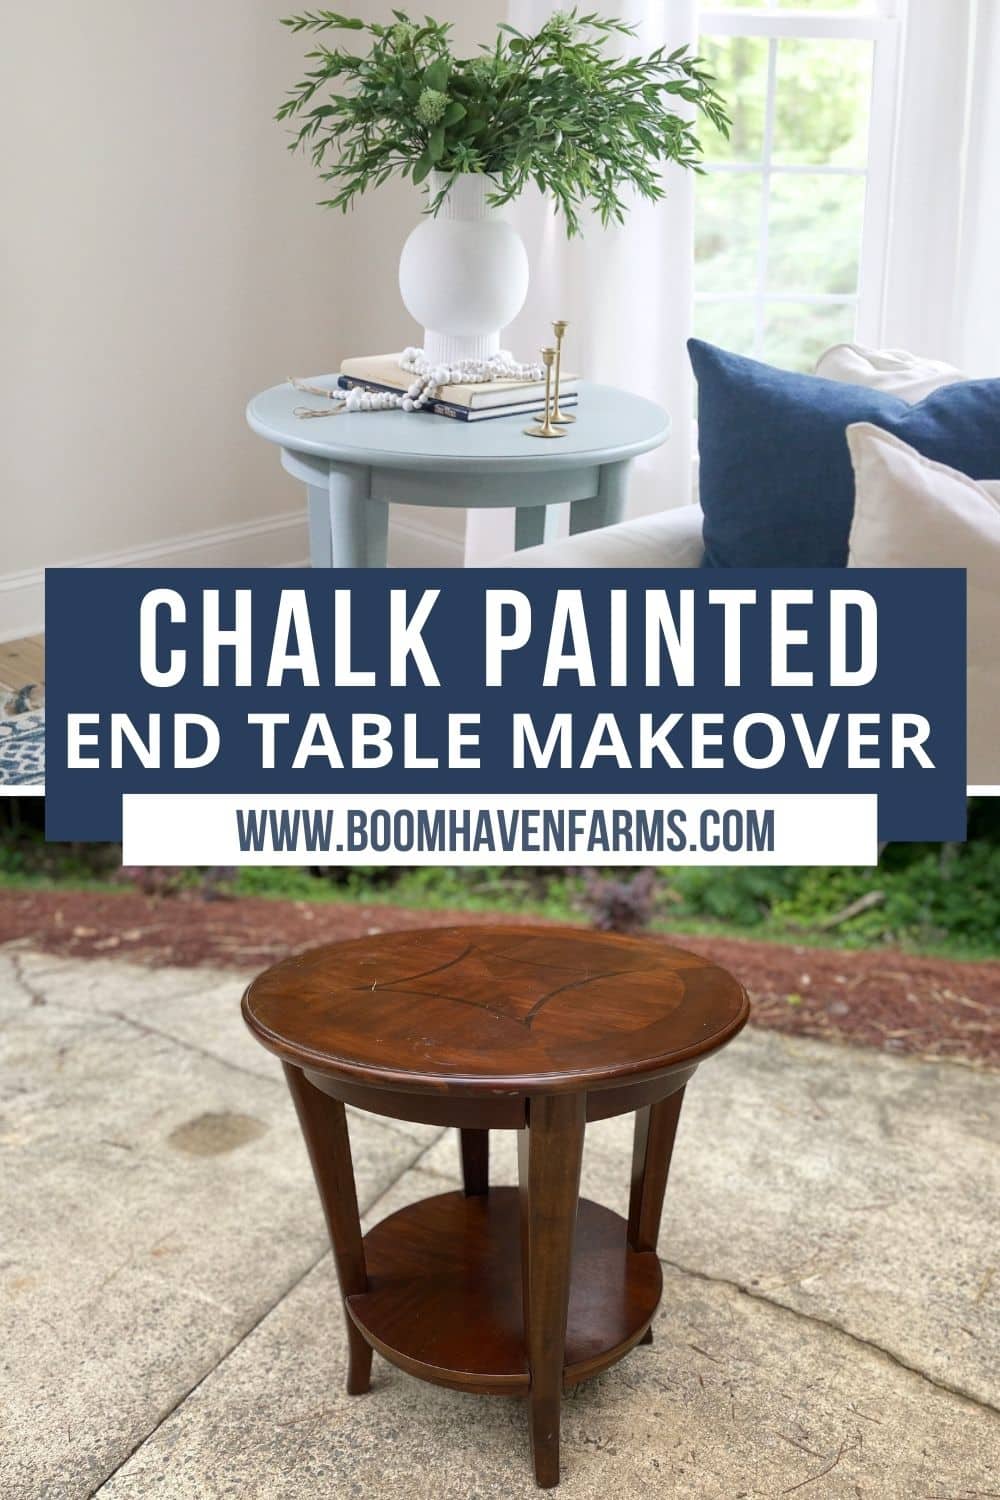 Before & After Chalk Painted furniture